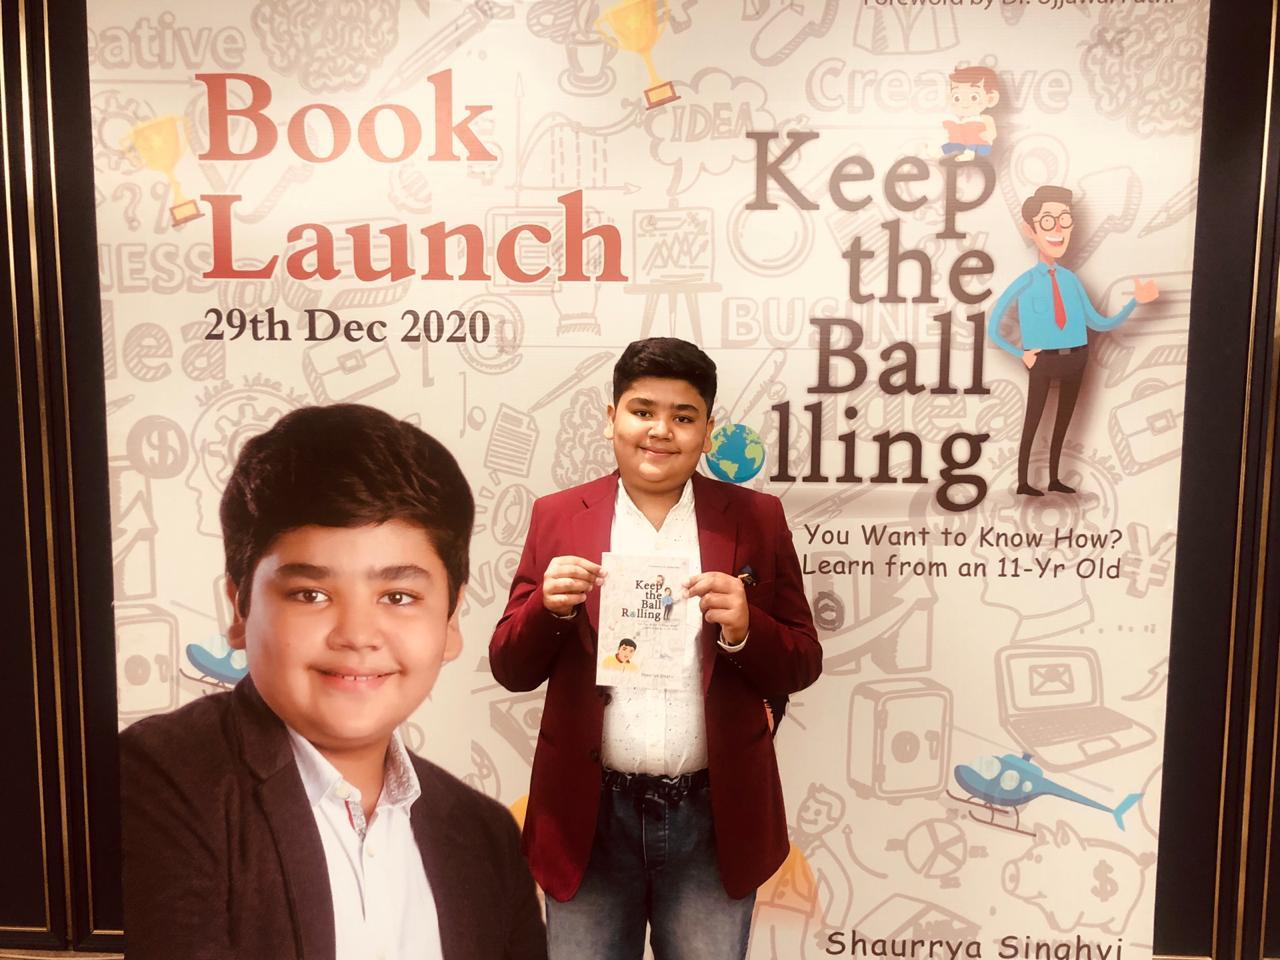 11-year old Surti boy Shaurrya Singhvi launched his first book, "Keep the Ball Rolling"